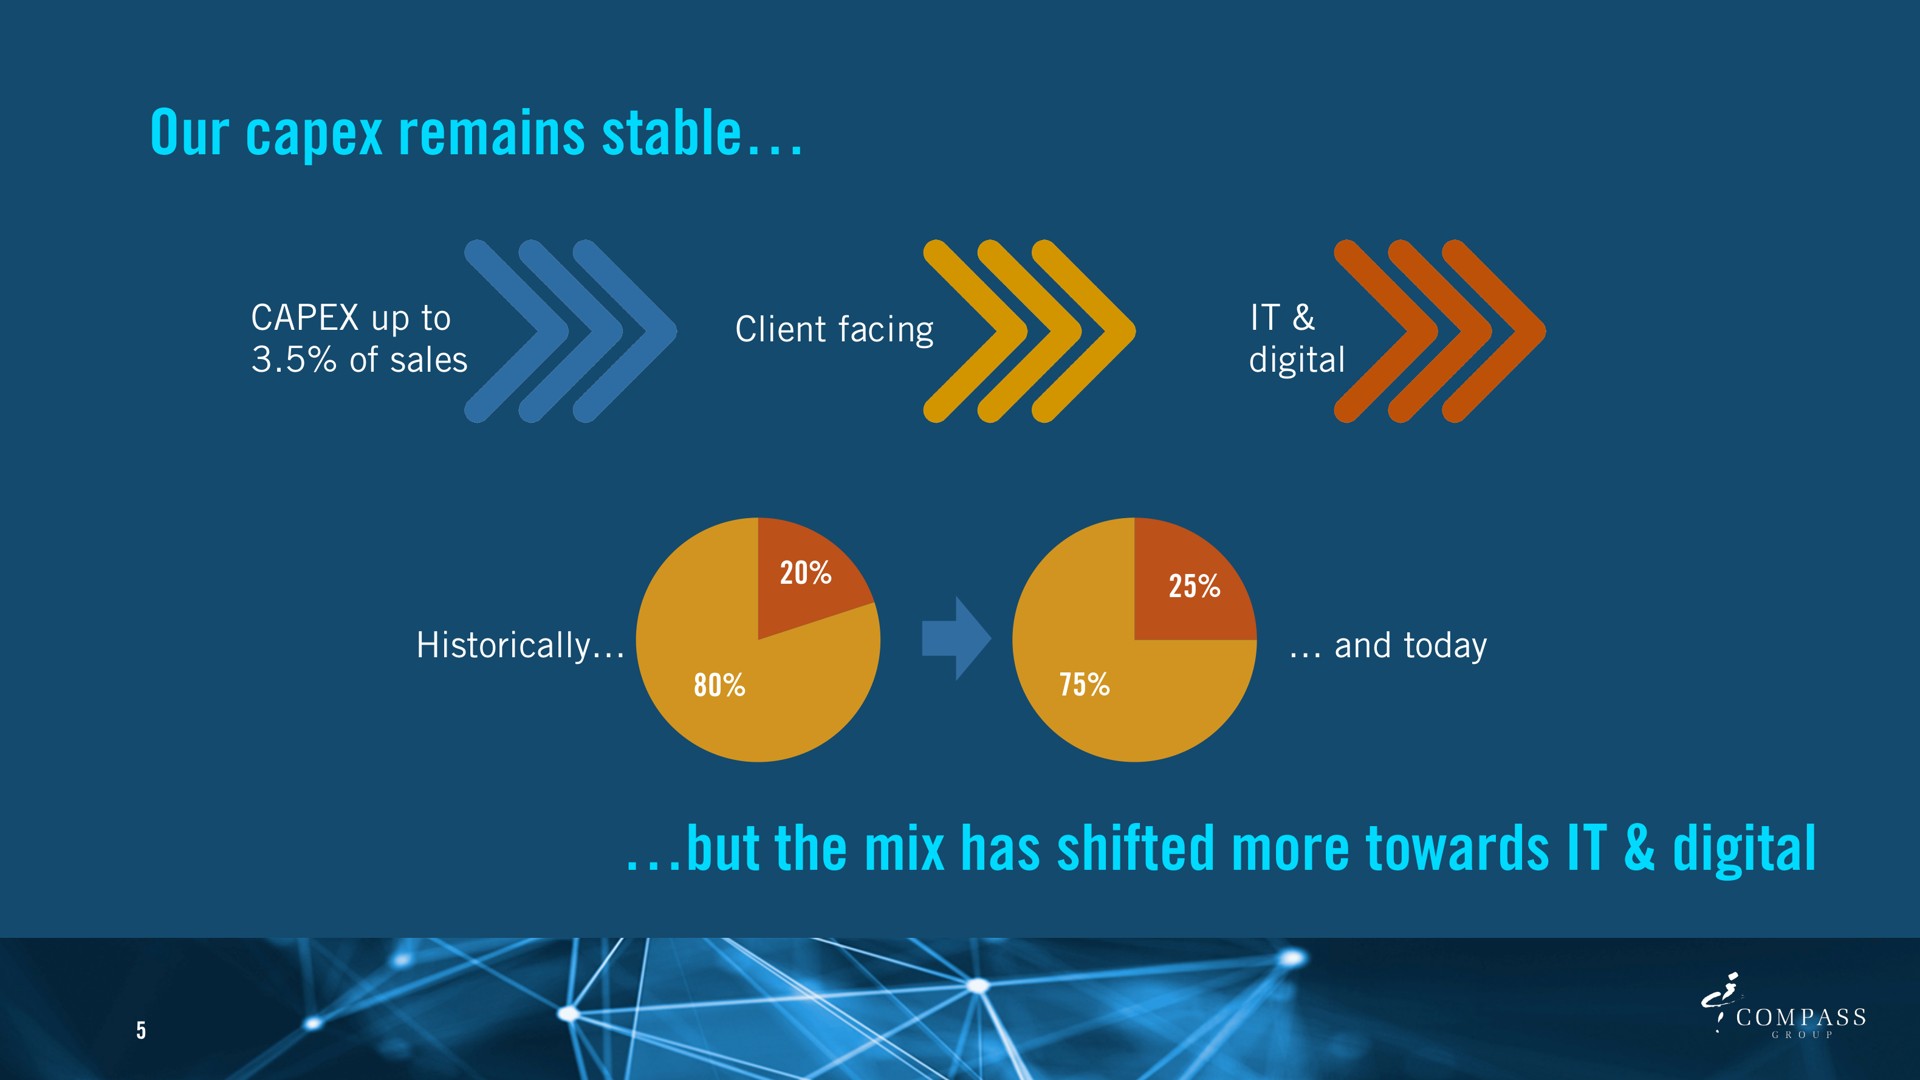 our remains stable but the mix has shifted more towards it digital | Compass Group